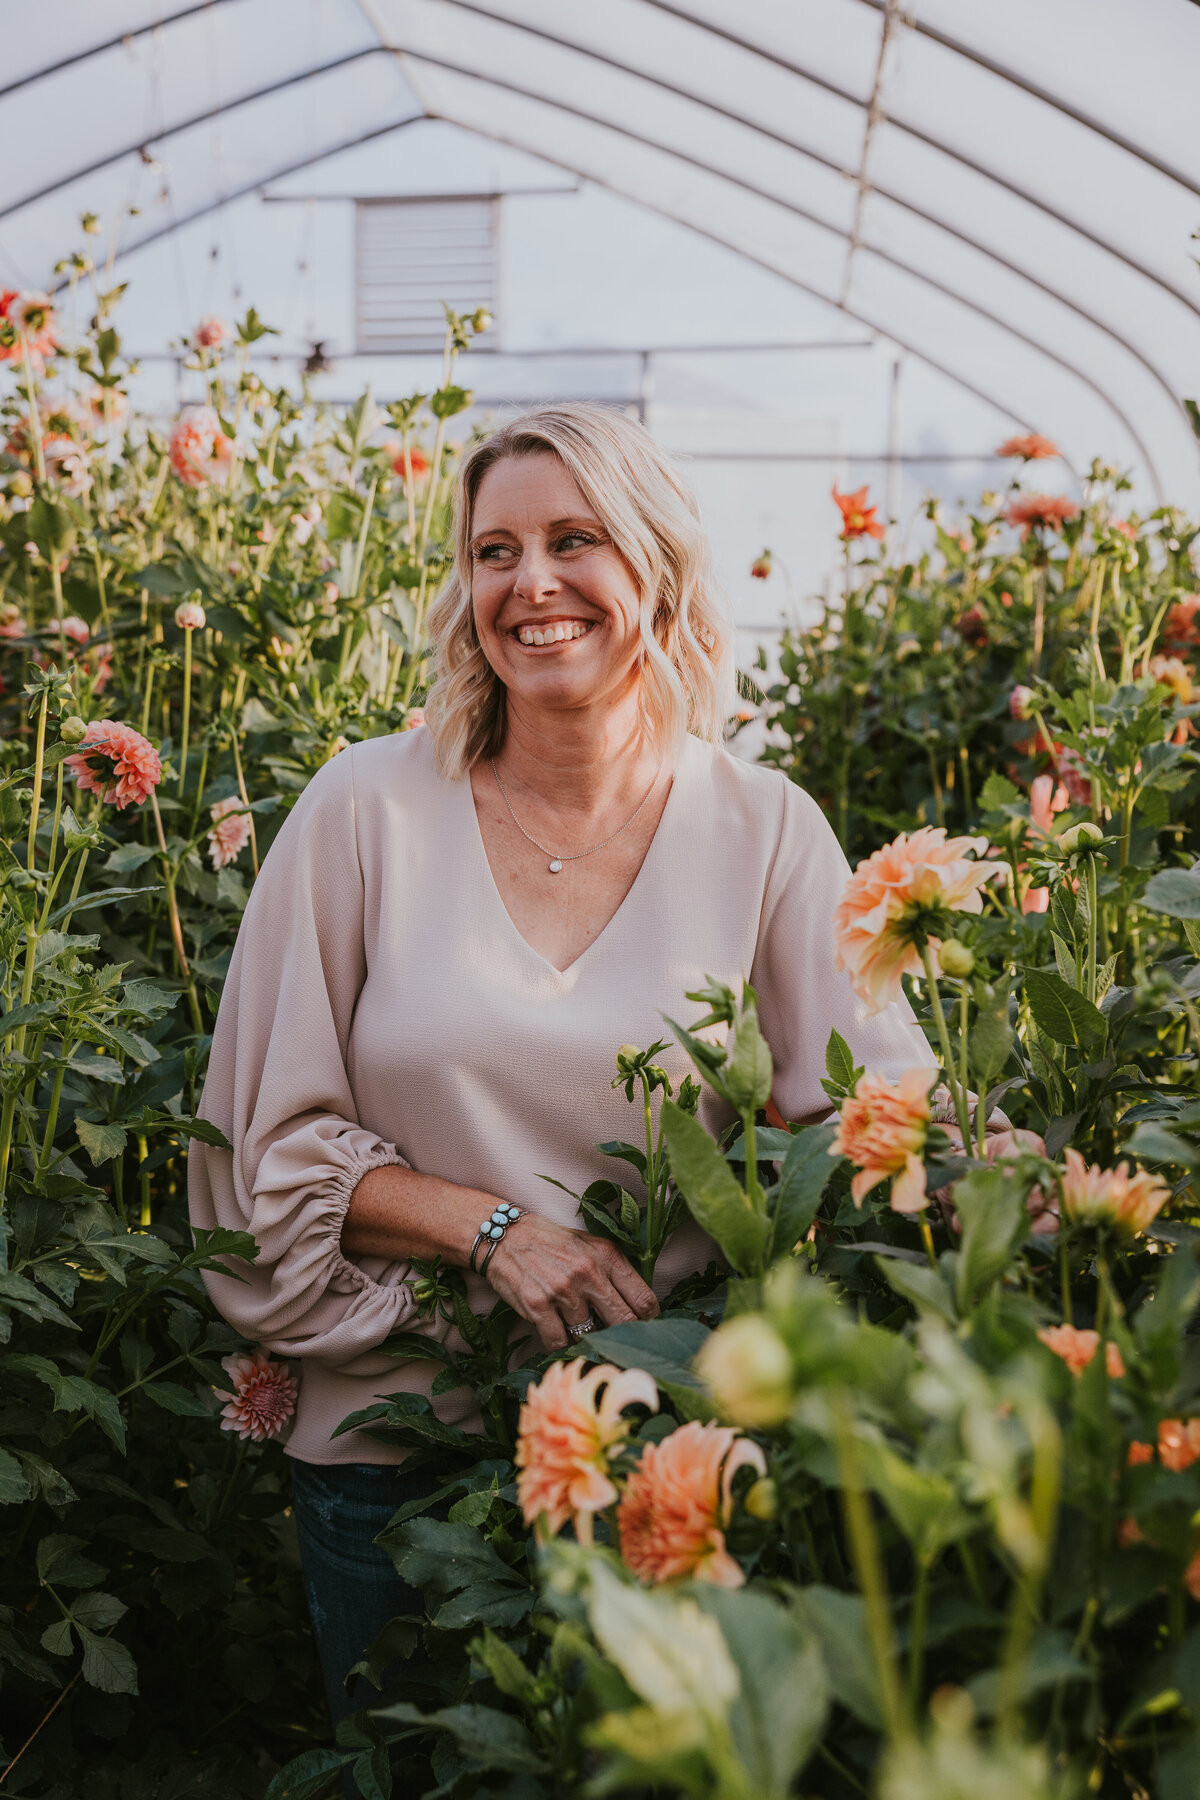 Woman smiles while walking through greenhouse full of flowers.